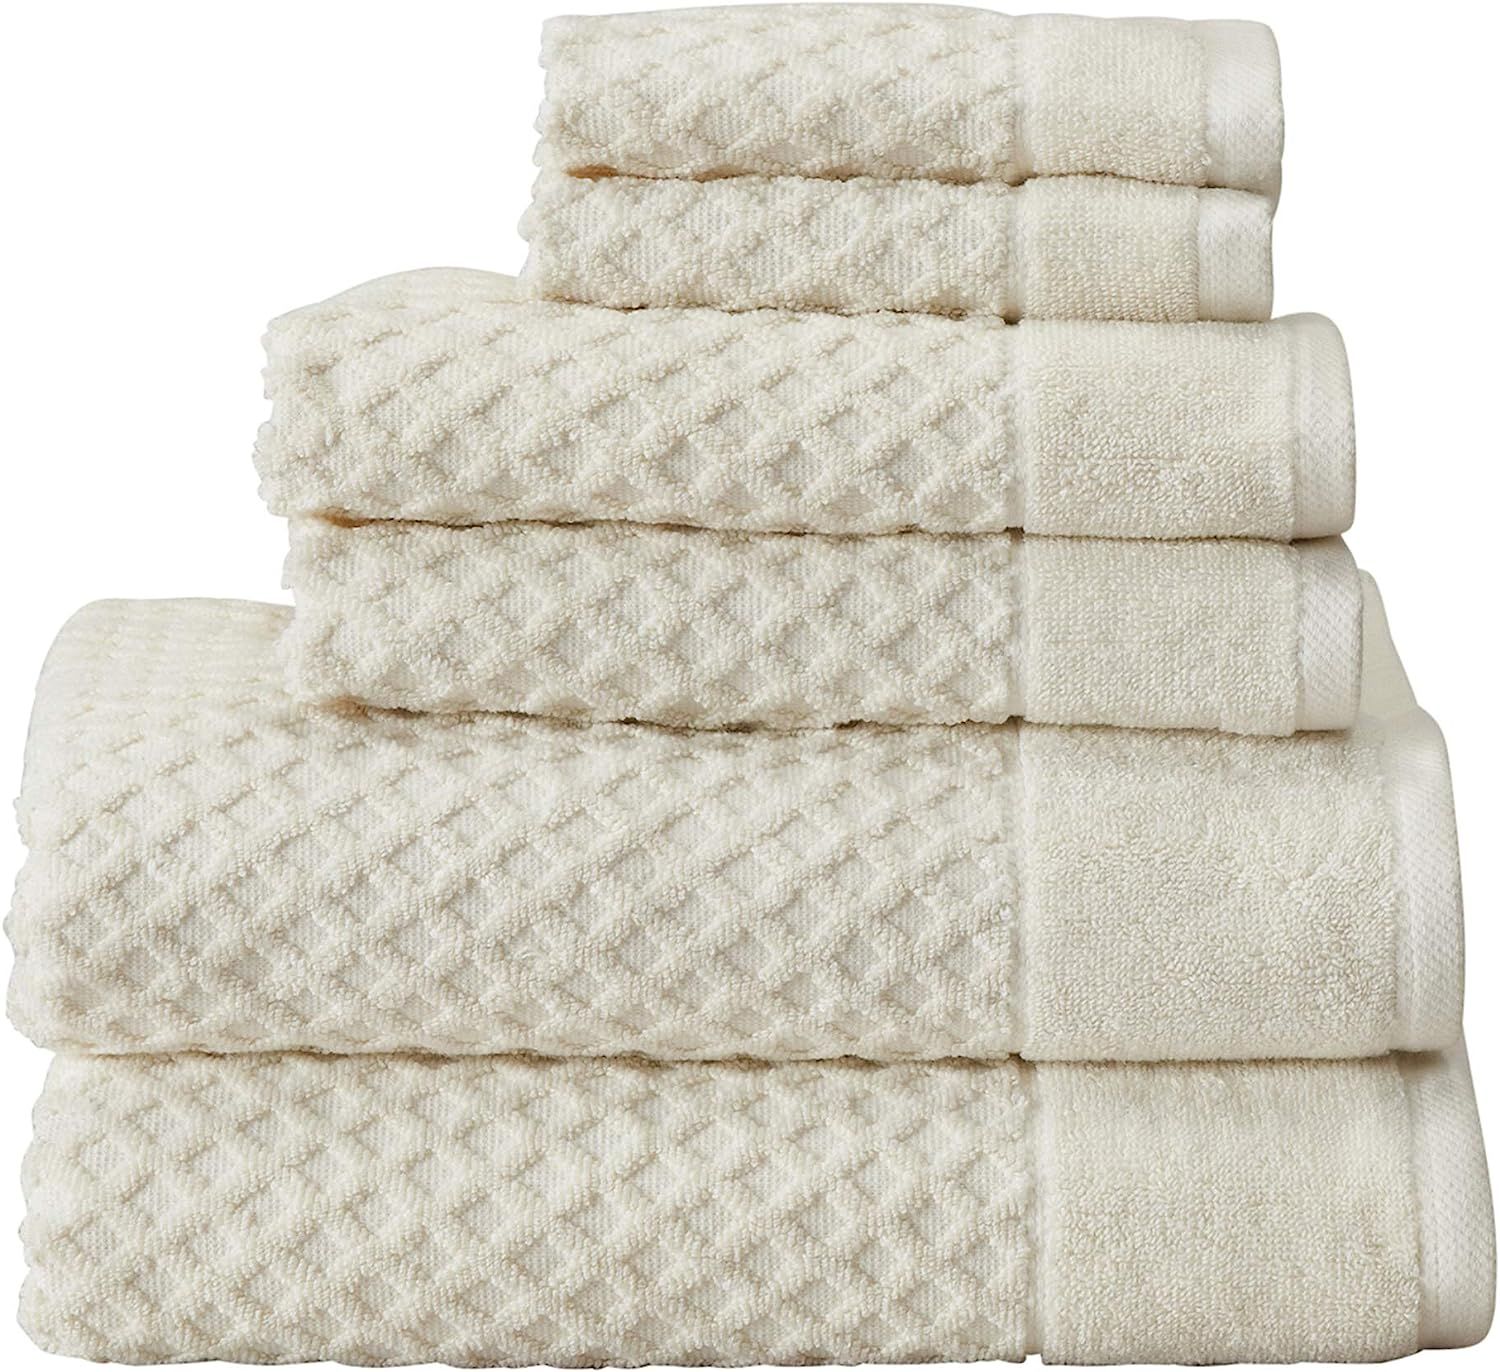 100% Cotton Bath Towels, Luxury 6 Piece Set - 2 Bath Towels, 2 Hand Towels and 2 Washcloths. Abso... | Amazon (US)